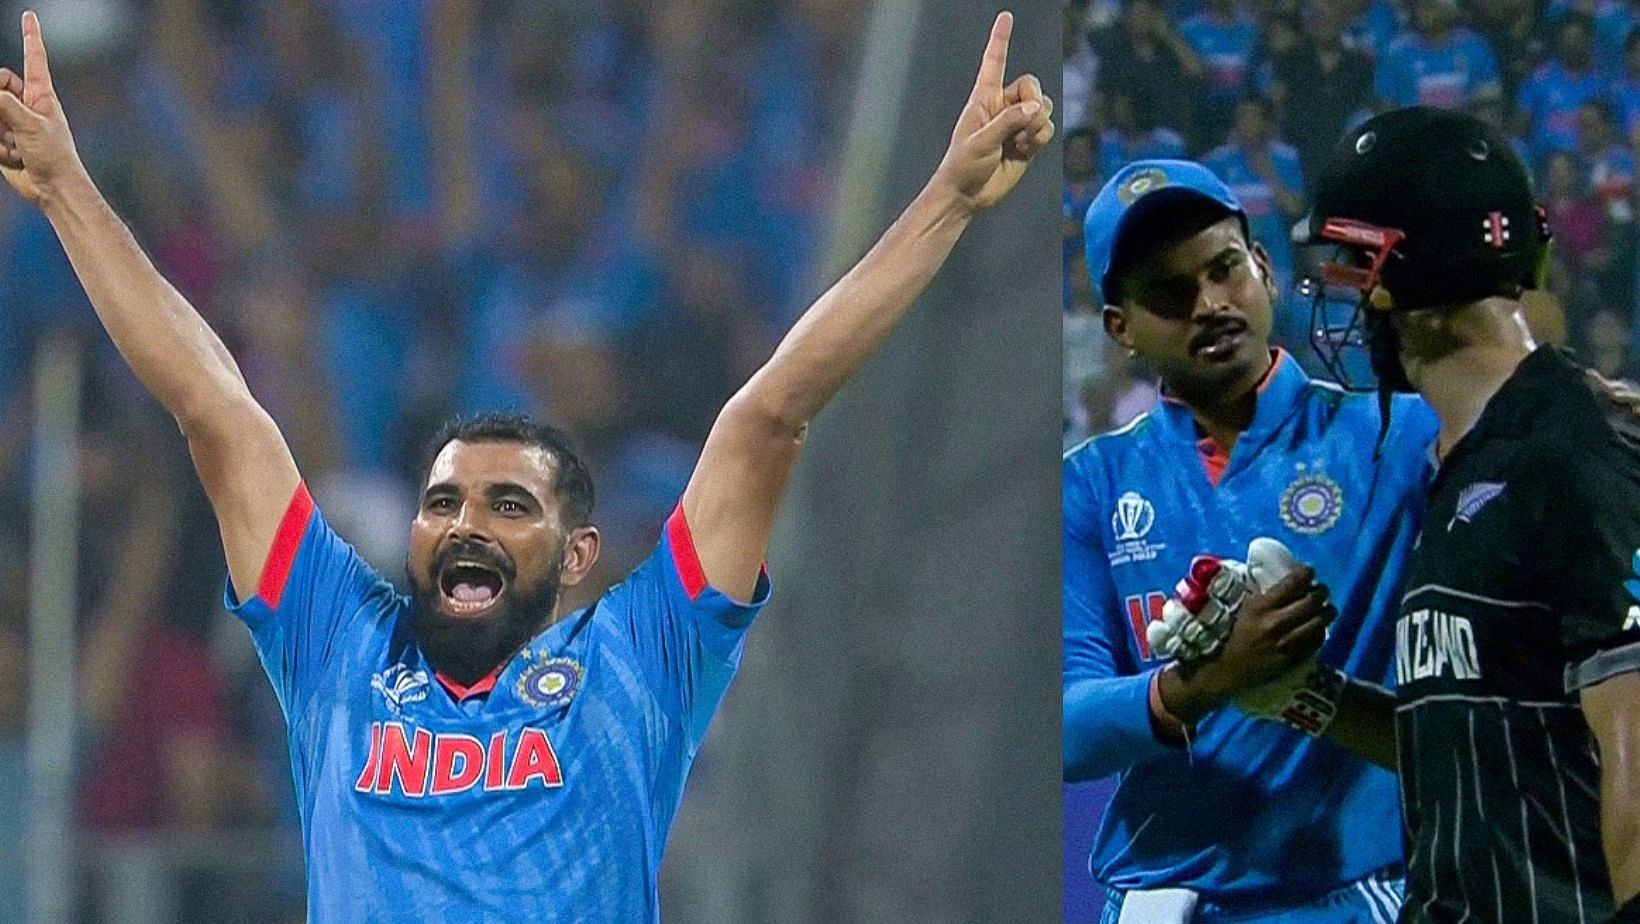 2023 World Cup: [Watch] Magical Mohammed Shami gets New Zealand's last hope Daryl Mitchell out to register record-breaking fifer